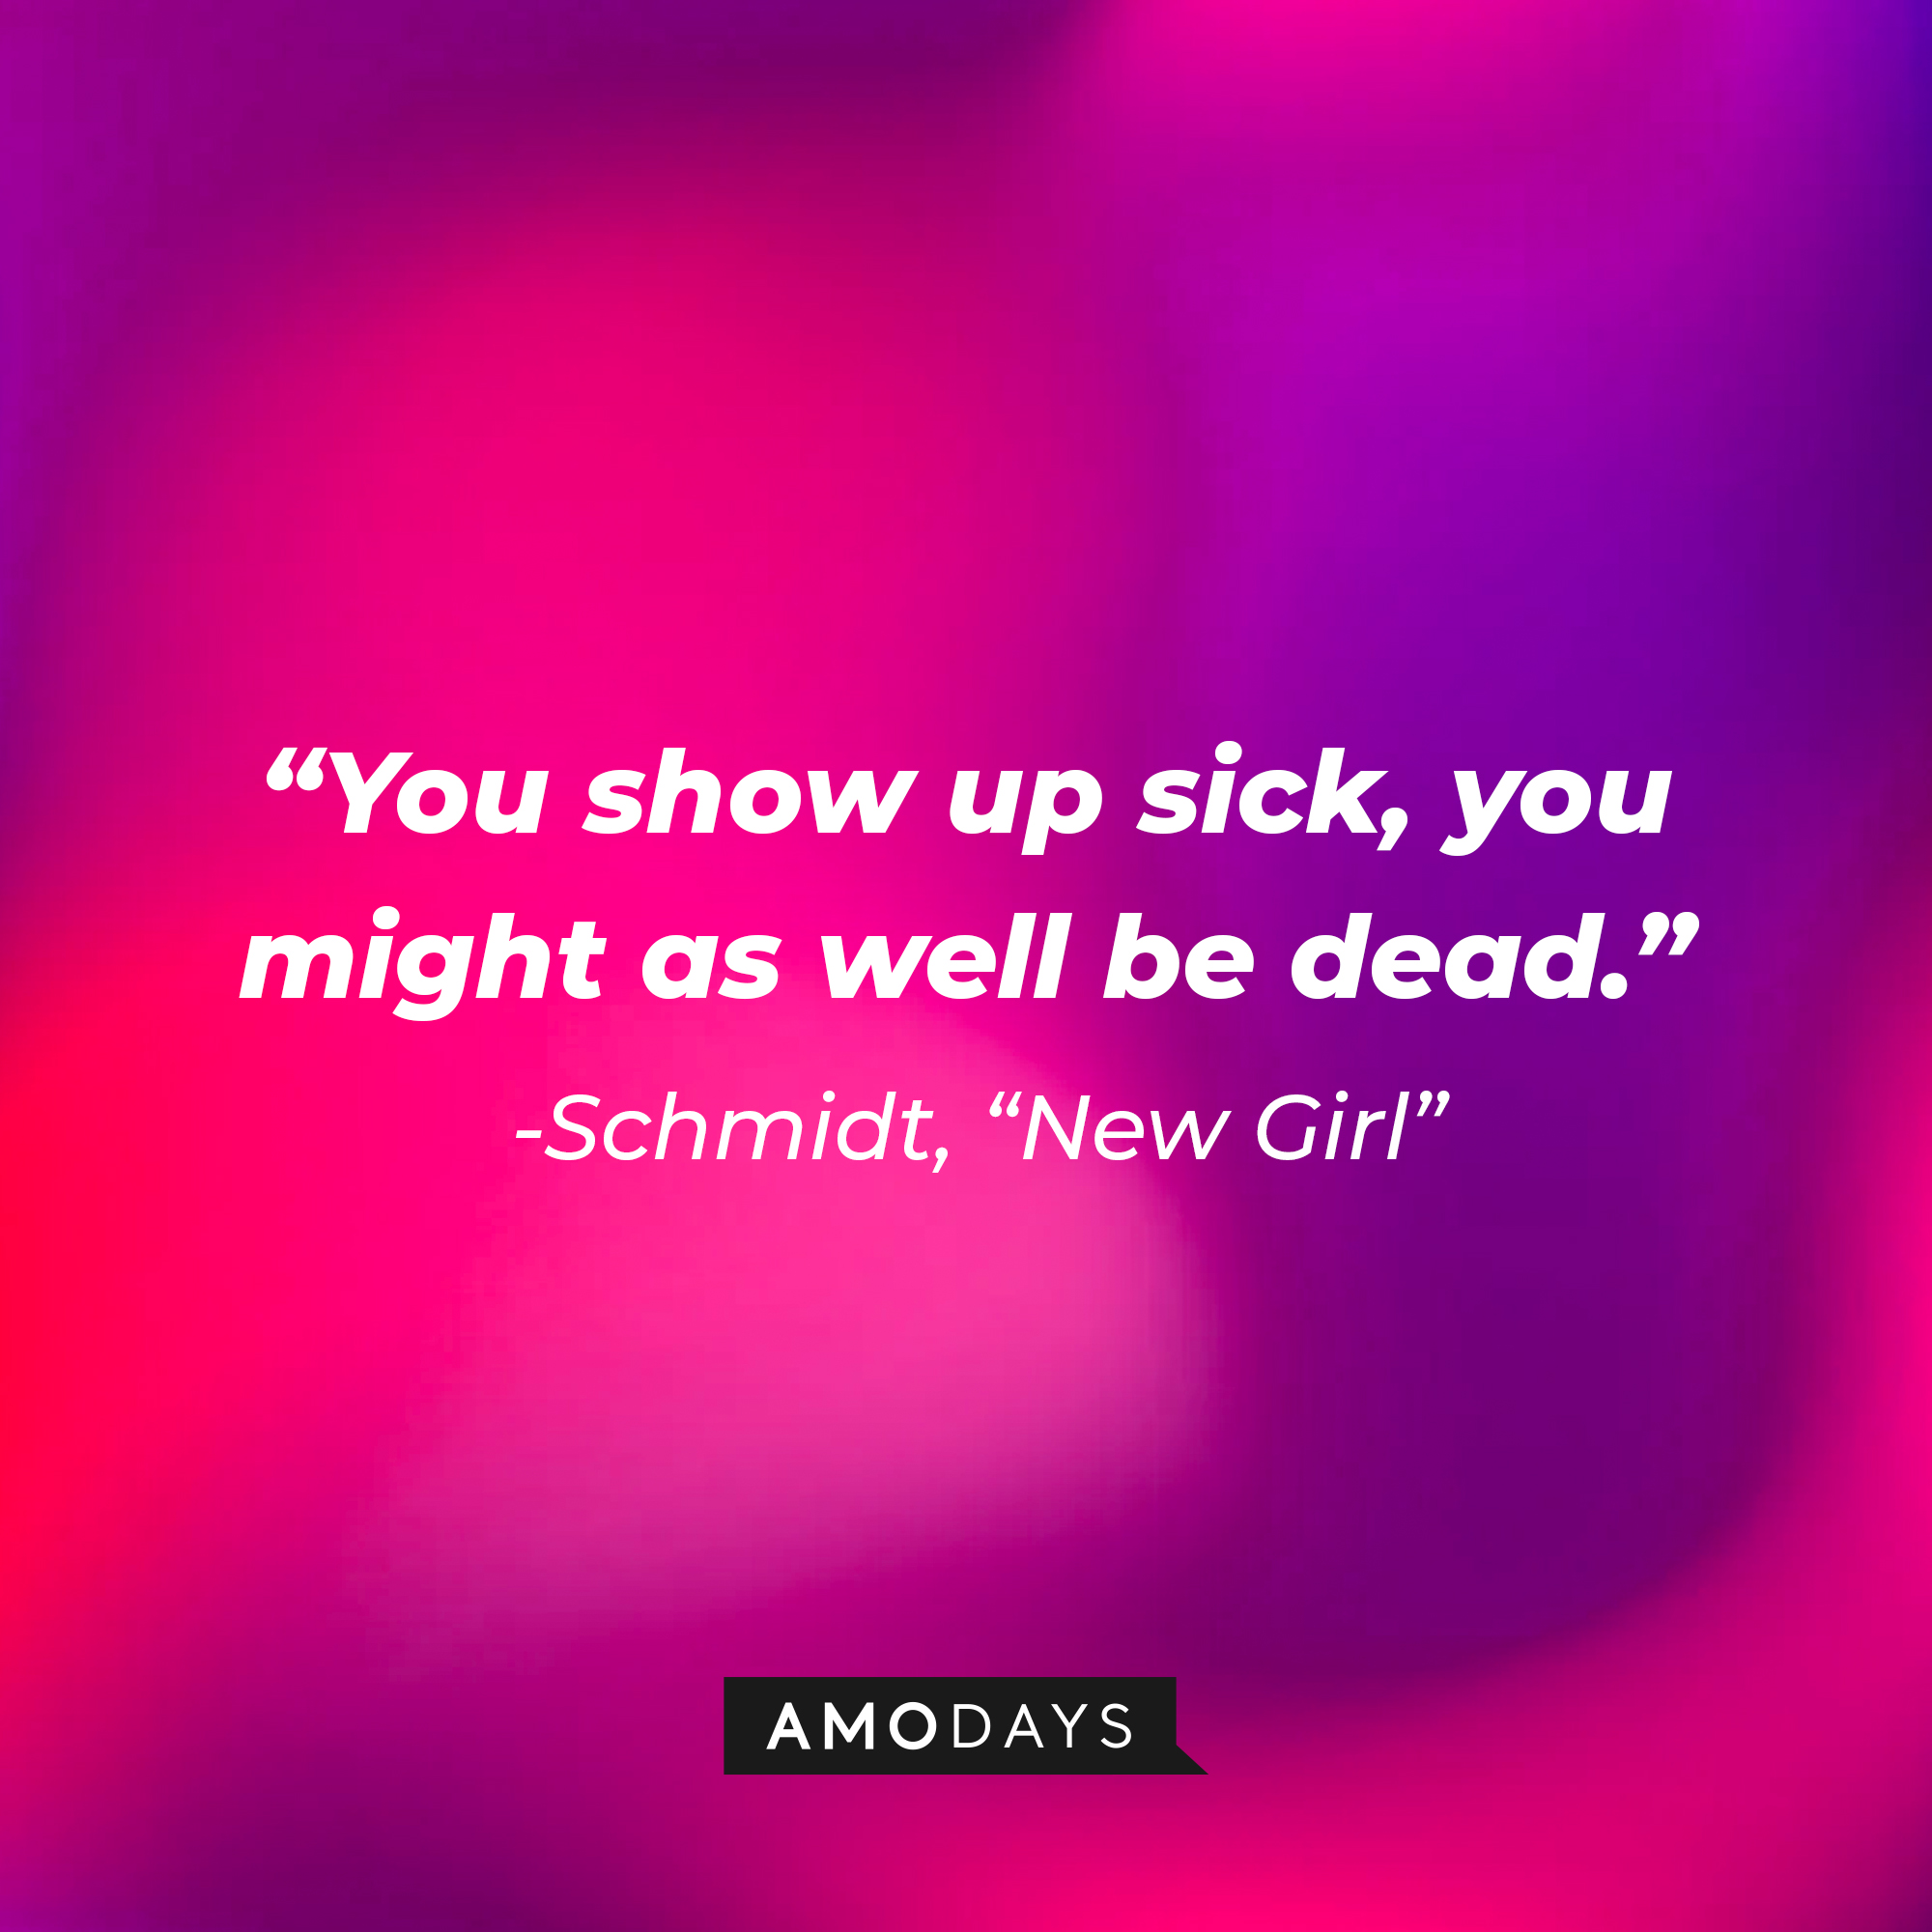 Schmidt's quote: "You show up sick, you might as well be dead." | Source: Amodays